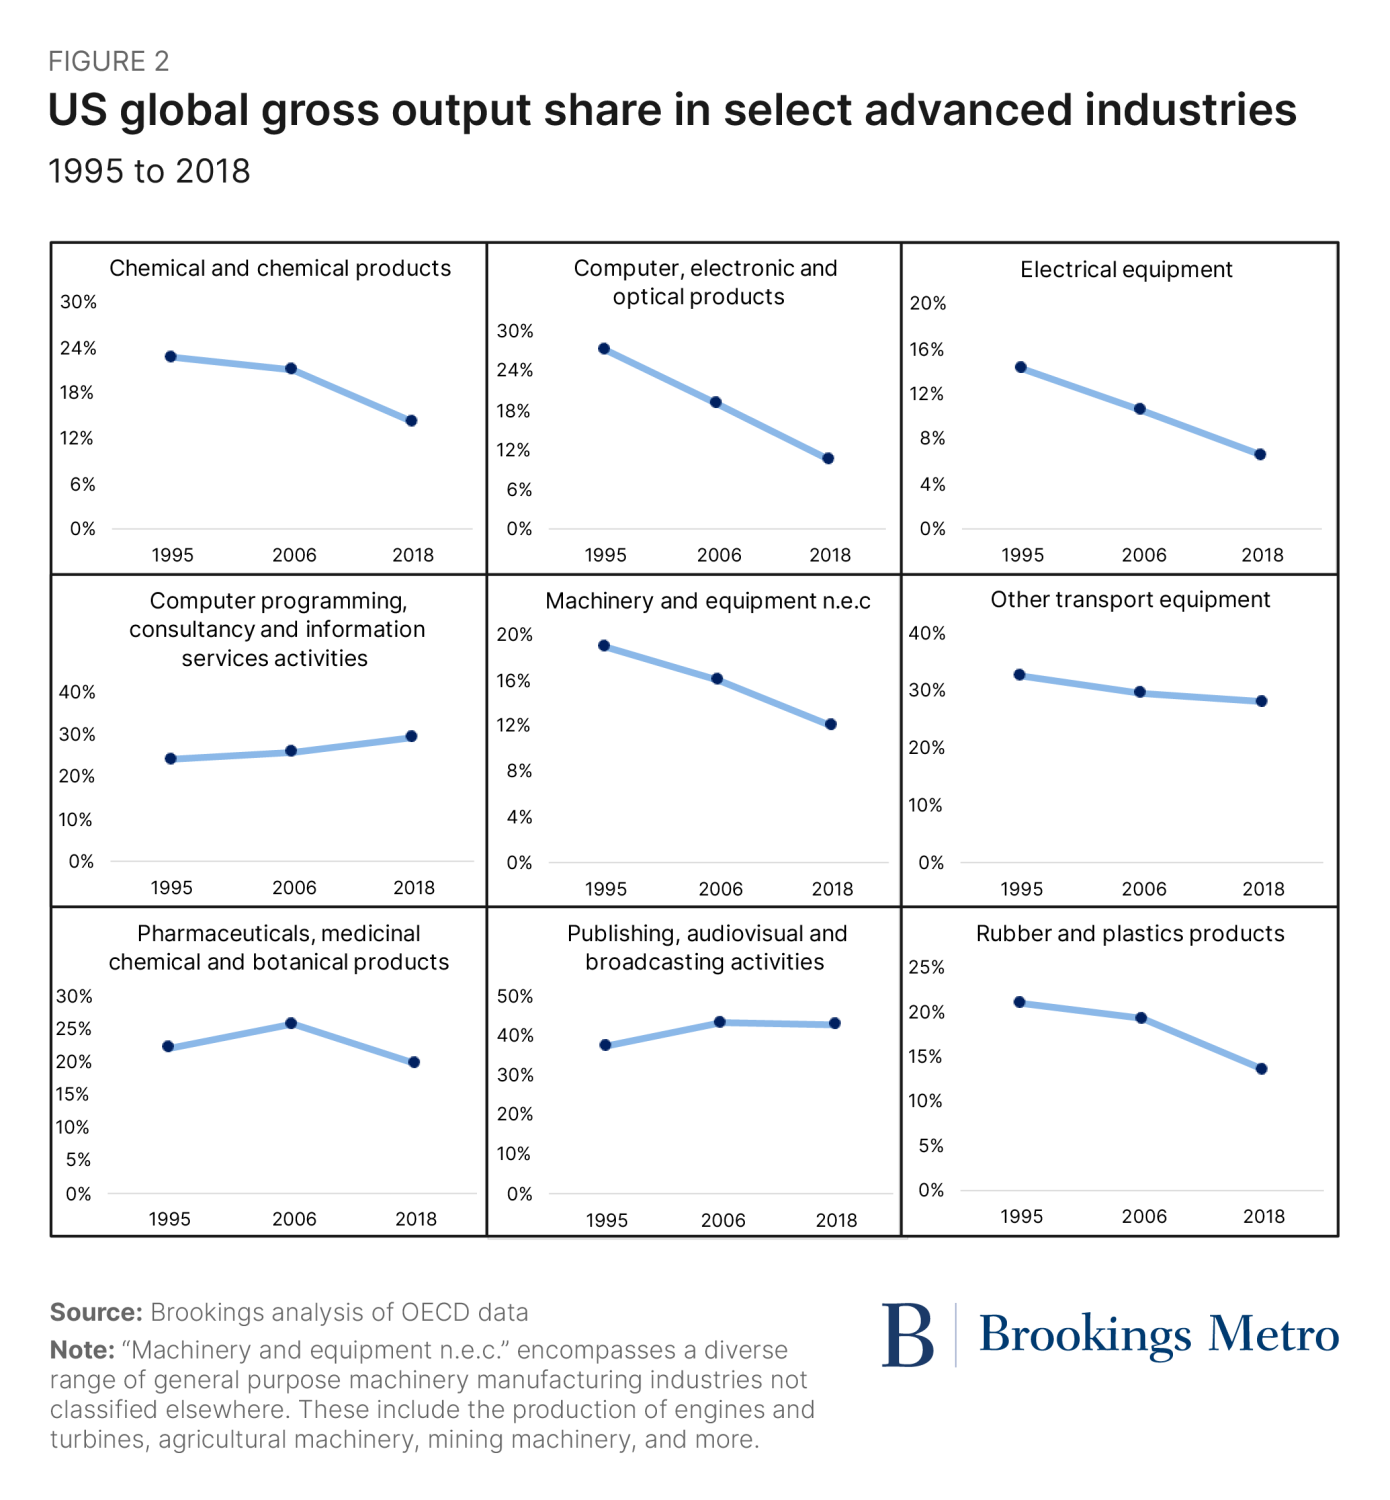 Figure 2. U.S. global gross output share in select advanced industries, 1995 to 2018